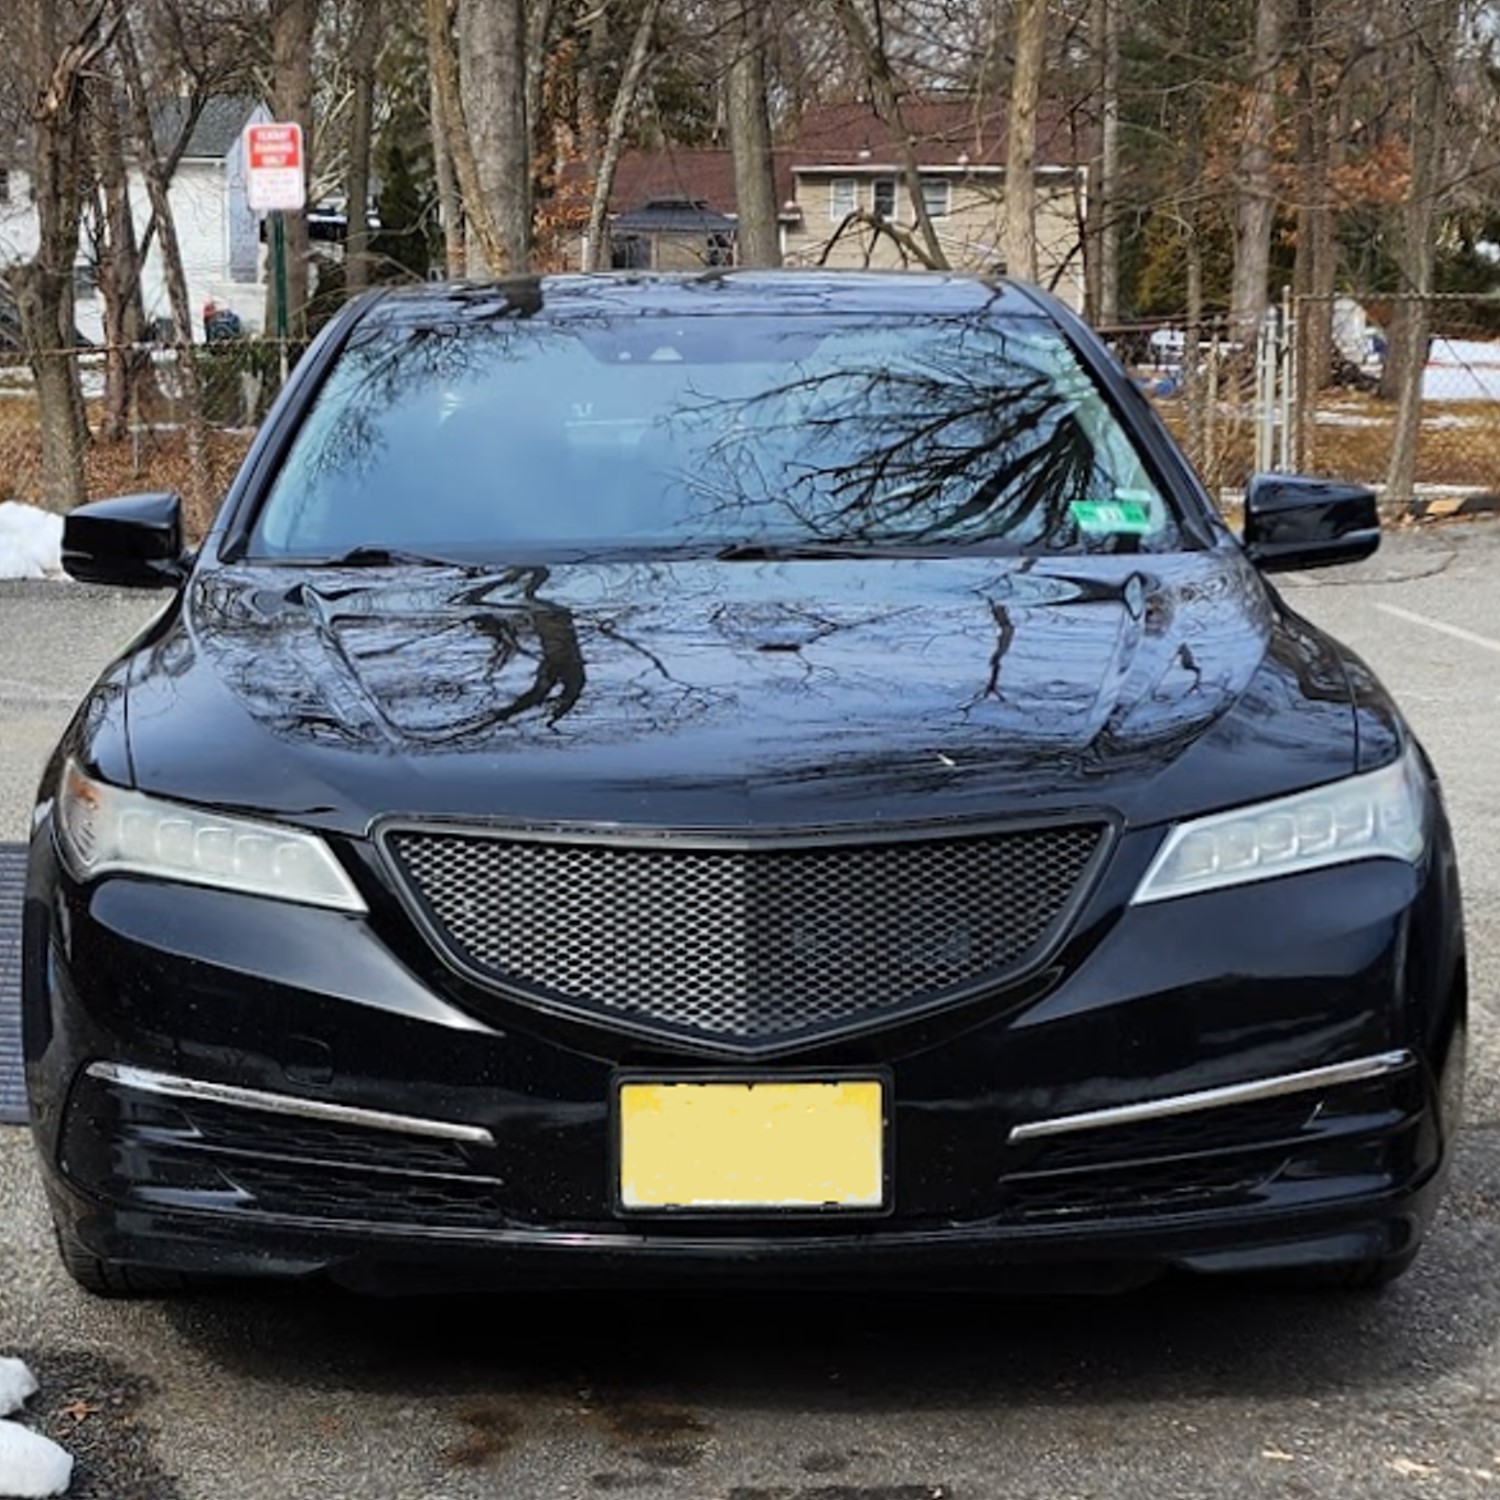 Beakless Grilles for mid-2010 Acura TLX - Full Black Frontend Transformation